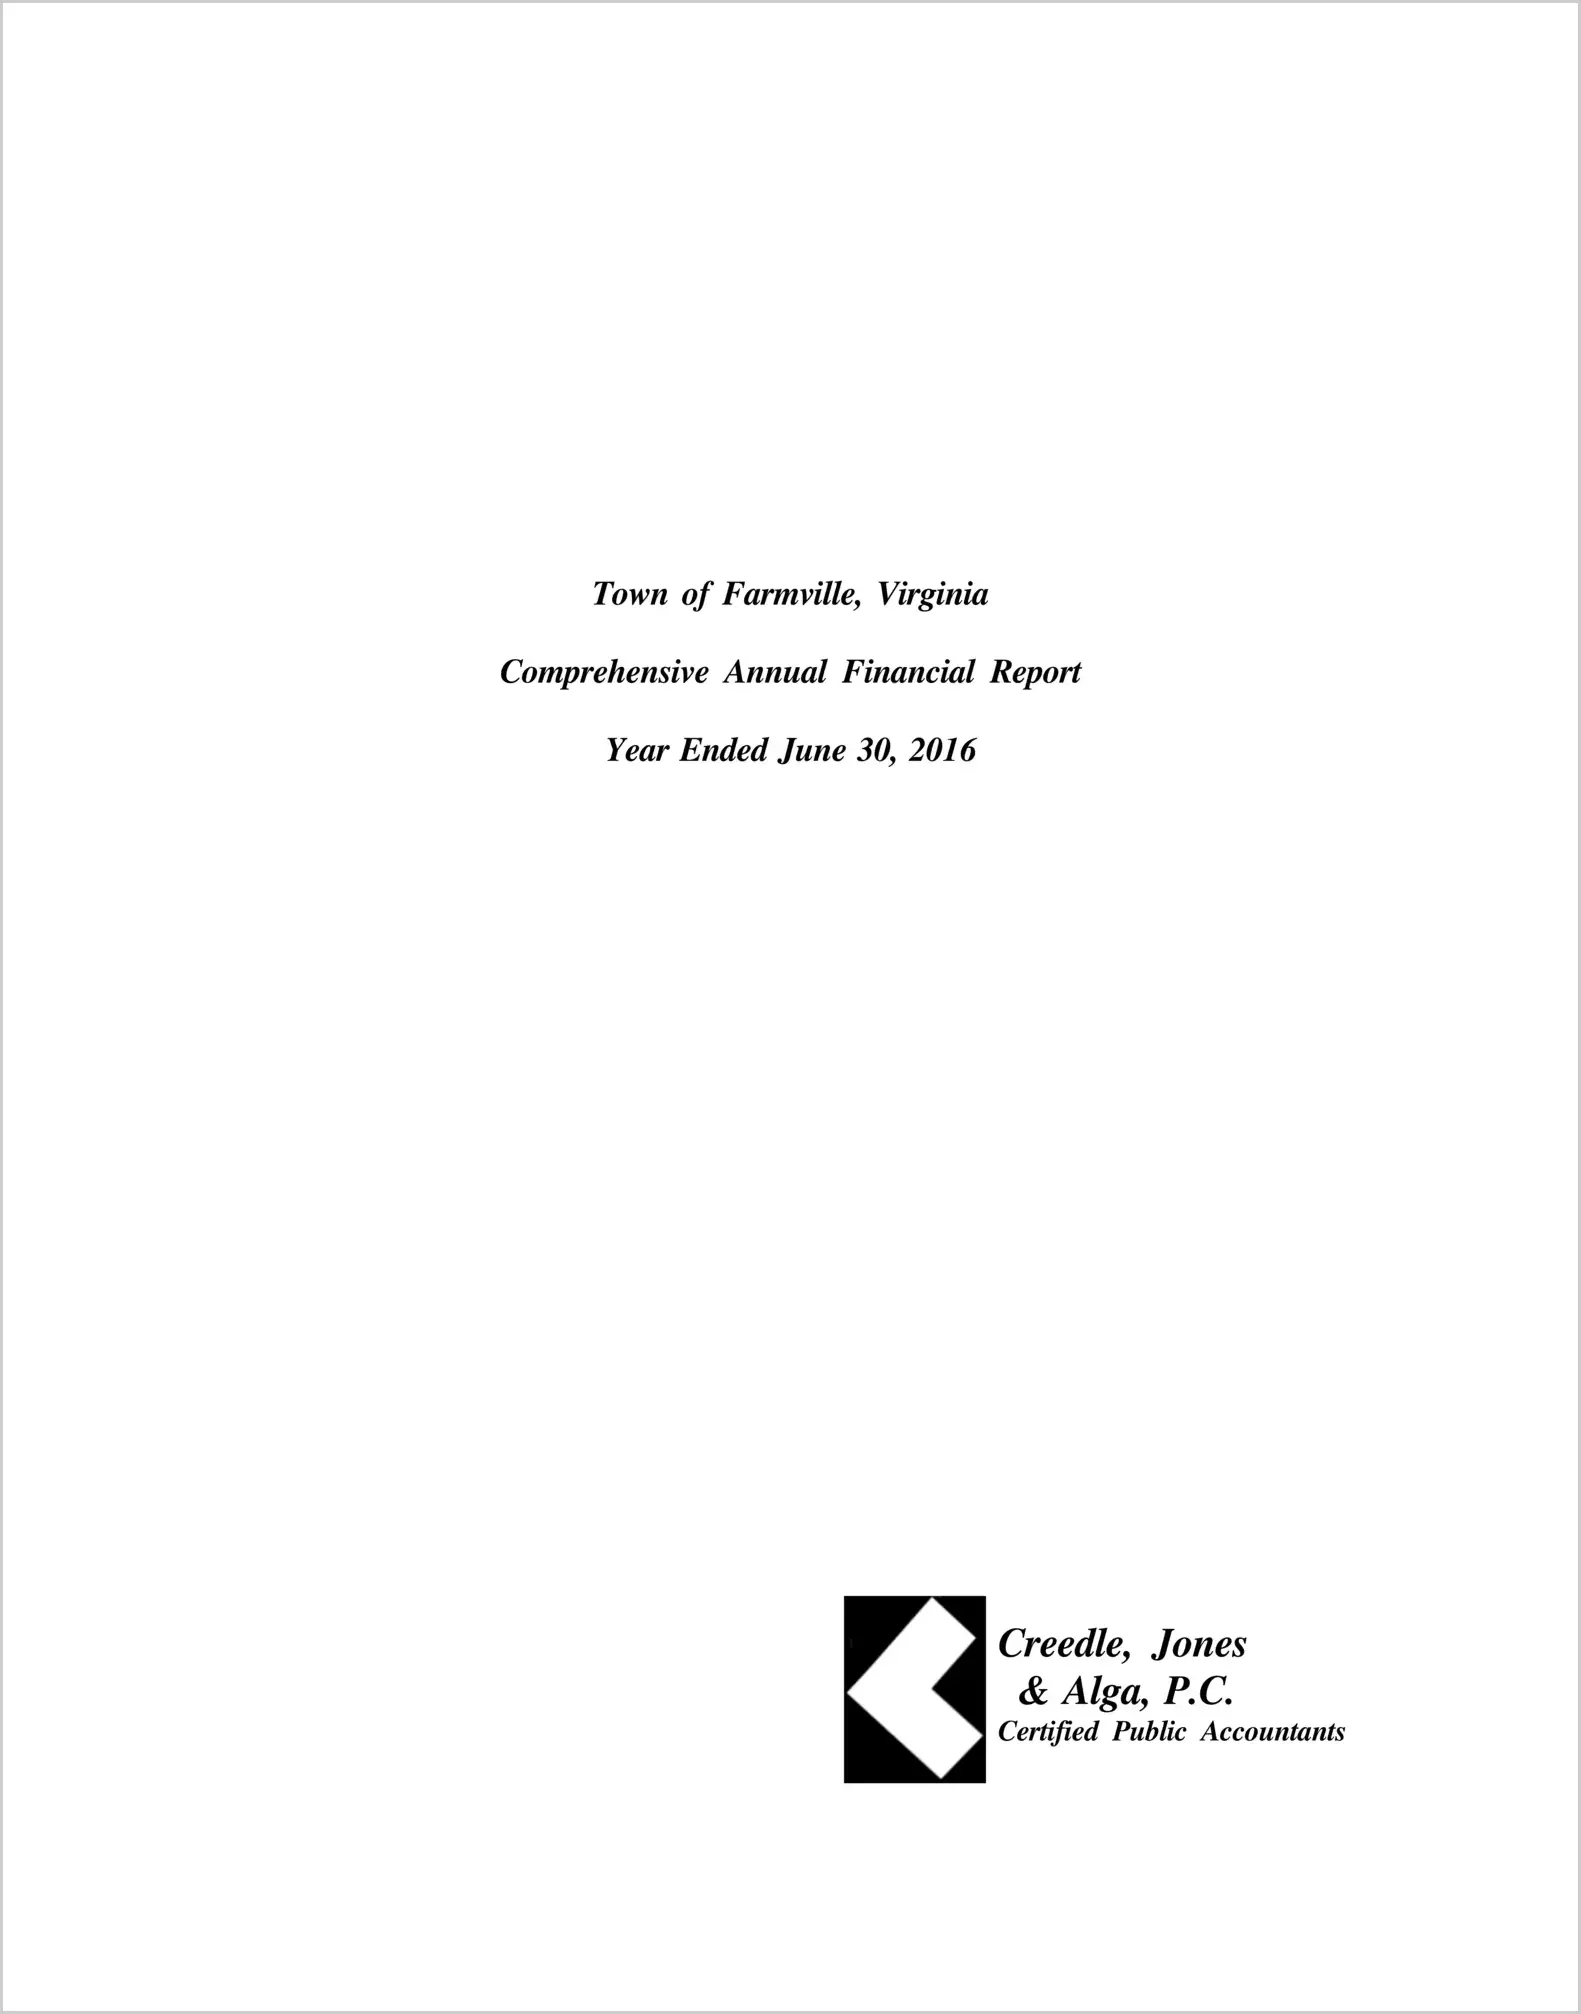 2016 Annual Financial Report for Town of Farmville